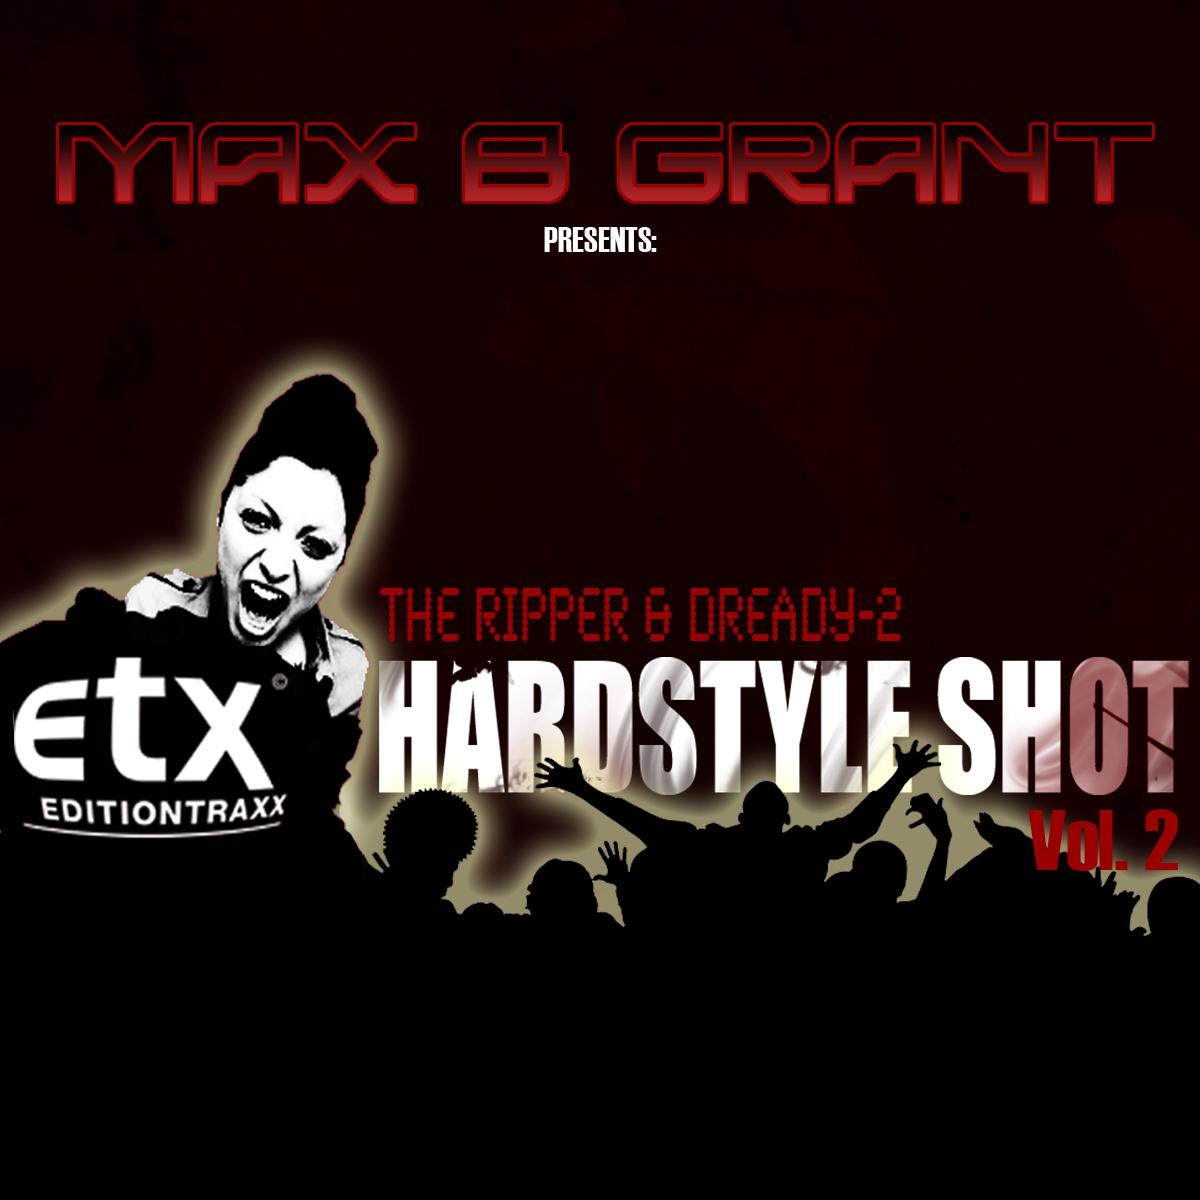 ETX Hardstyle Shot Vol.2 - presented by Max B. Grant